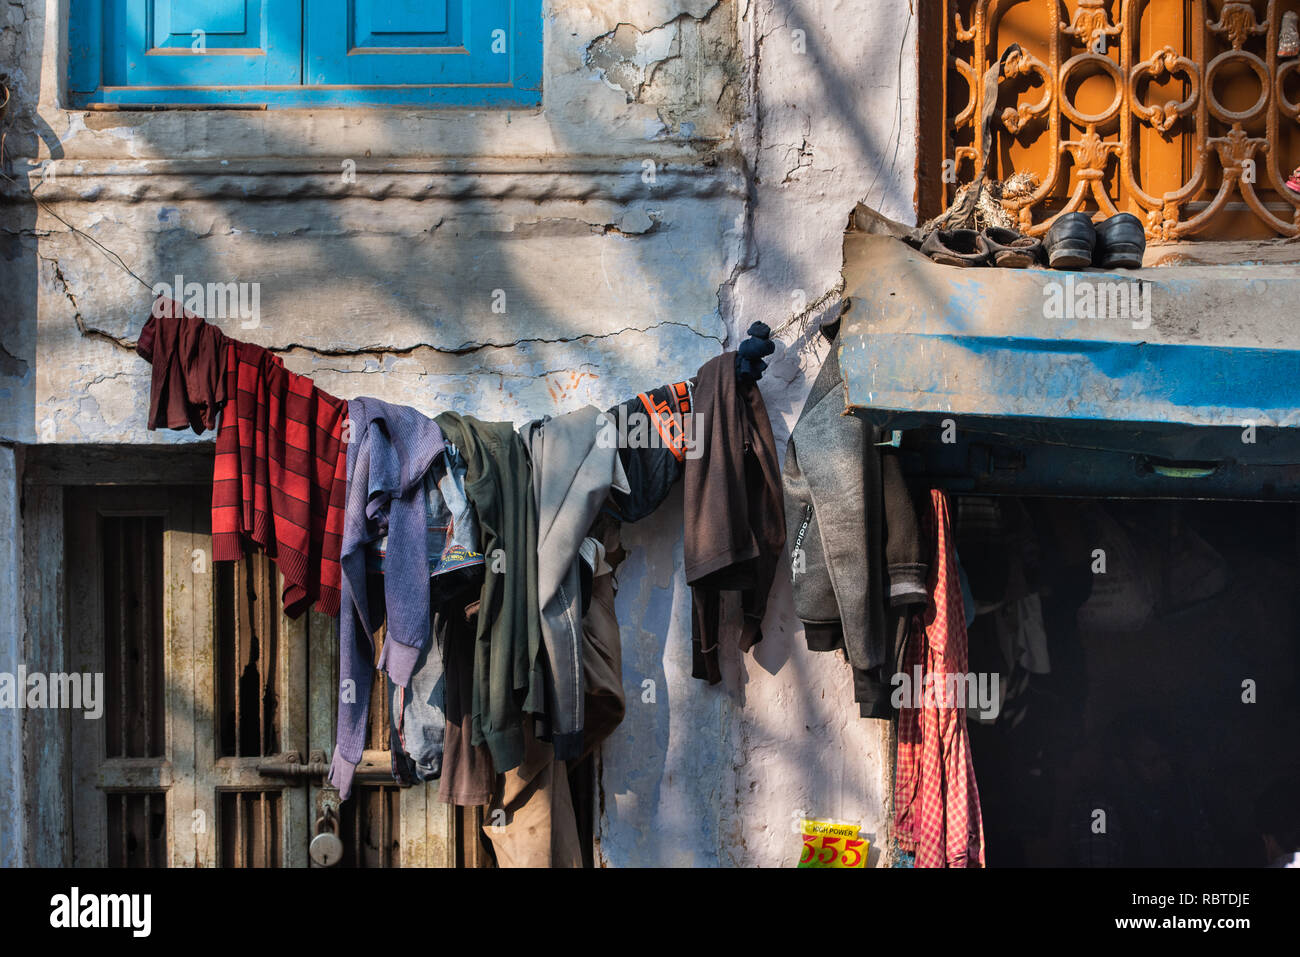 Detail of a house with clothes drying in the narrow lanes of Chandni Chowk, Delhi, India Stock Photo